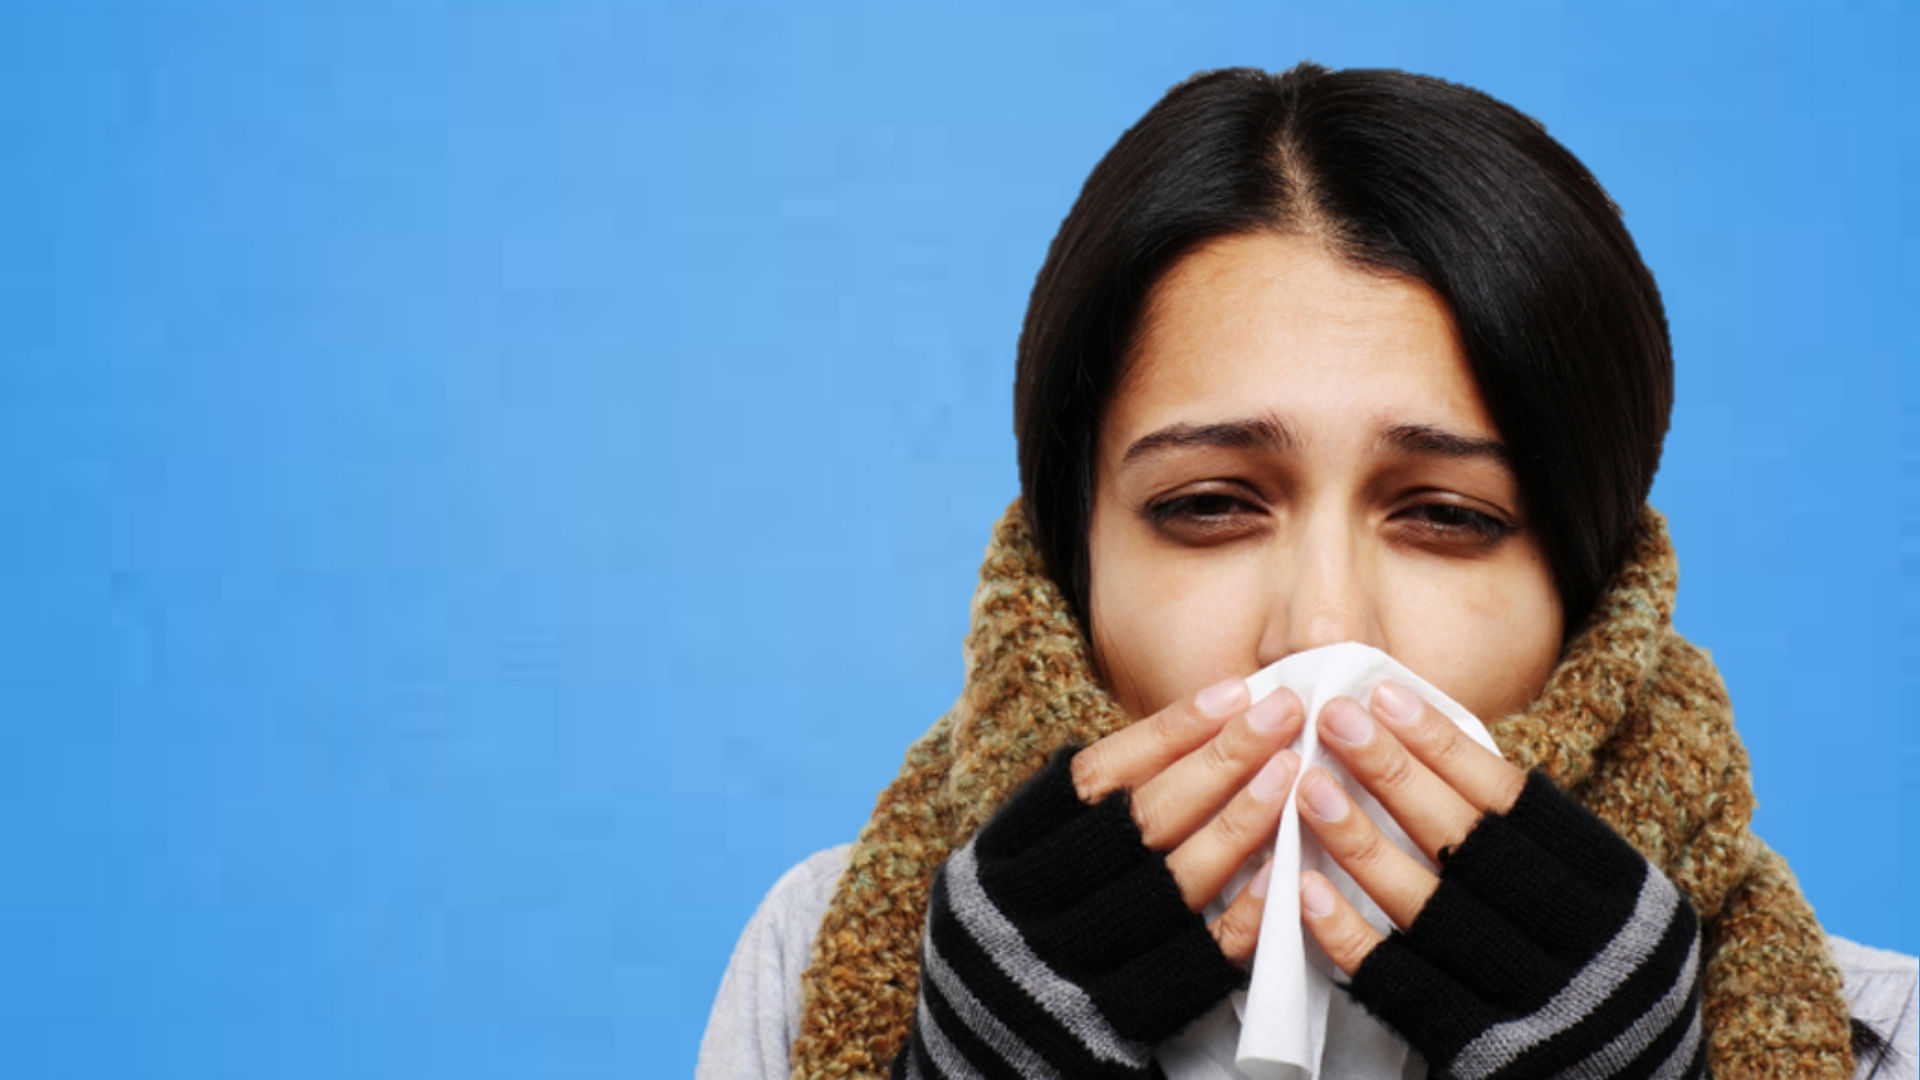 What works best when it comes to treating common cold and cough?